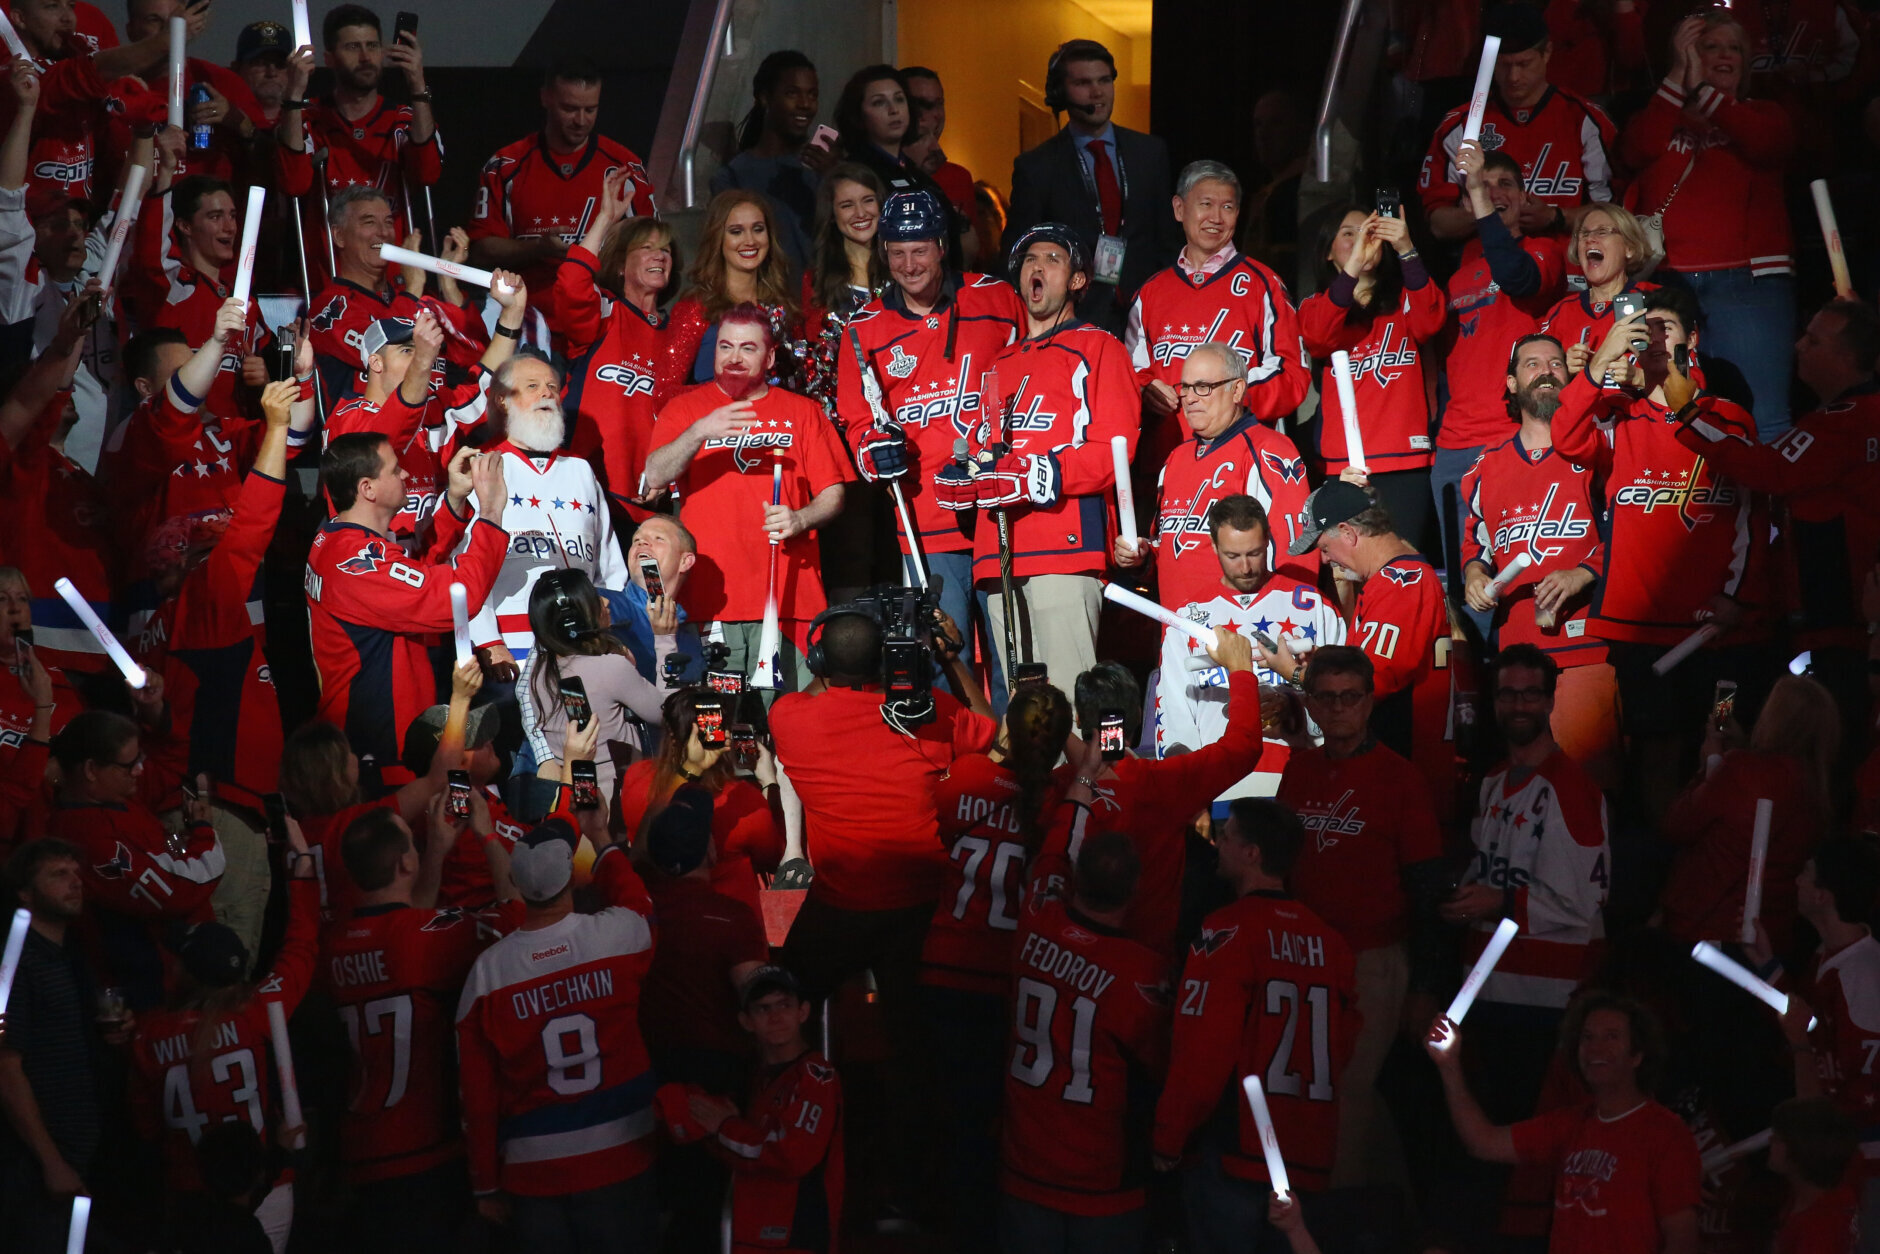 <h4>8. At home on the ice as well</h4>
<p>More than just a player who spent his career here, Ryan and his family became a part of the community.</p>
<p>And when the Washington Capitals advanced to the Stanley Cup Finals in 2018, who was there to cheer them on for the pregame “Let Go Caps!” than Zim and Max Scherzer.</p>
<p>Rock the Red, indeed …</p>
